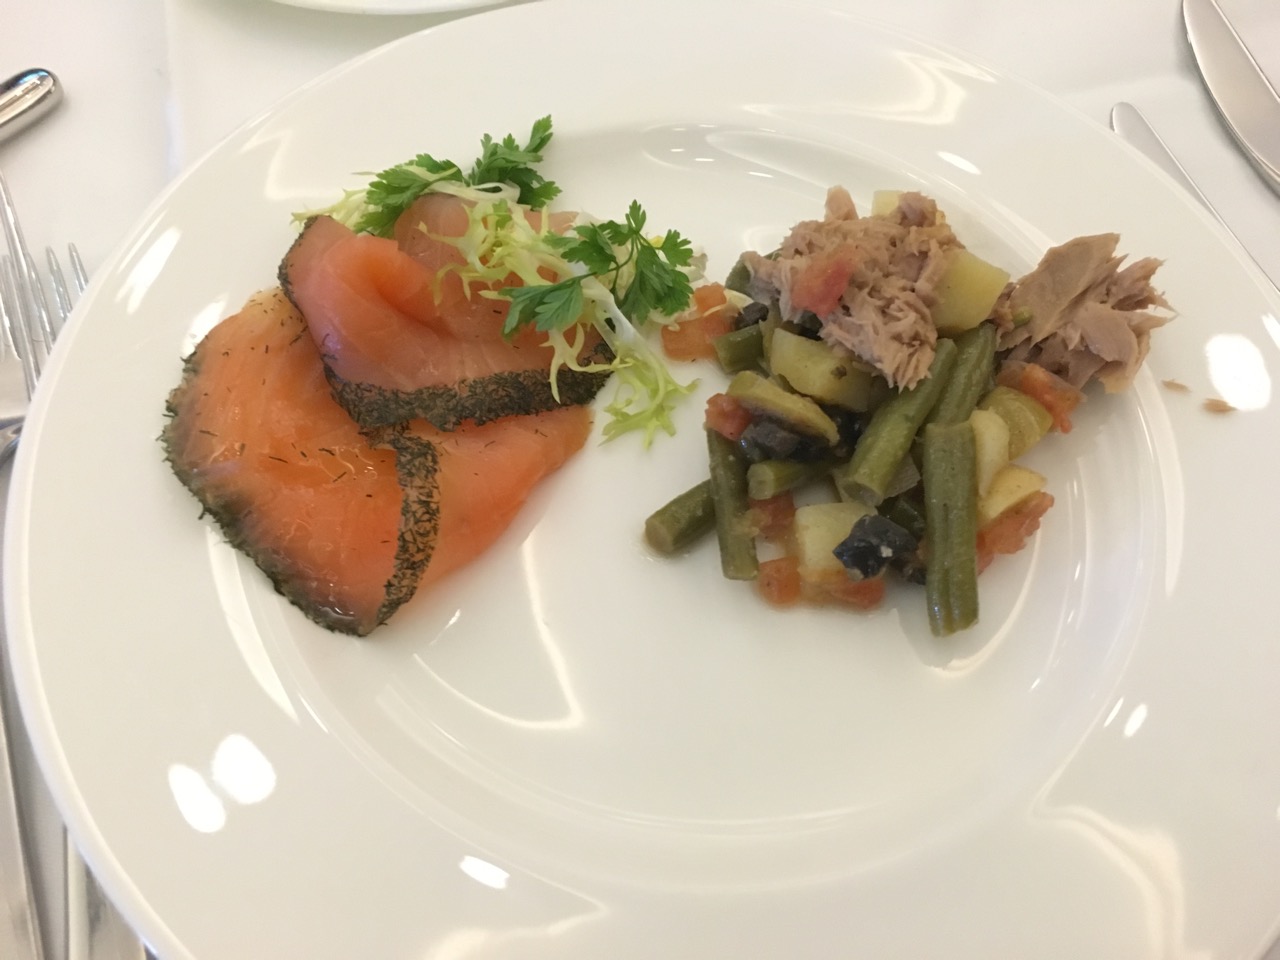 Marinated Salmon with Dill Mustard Dip and Salade niçoise